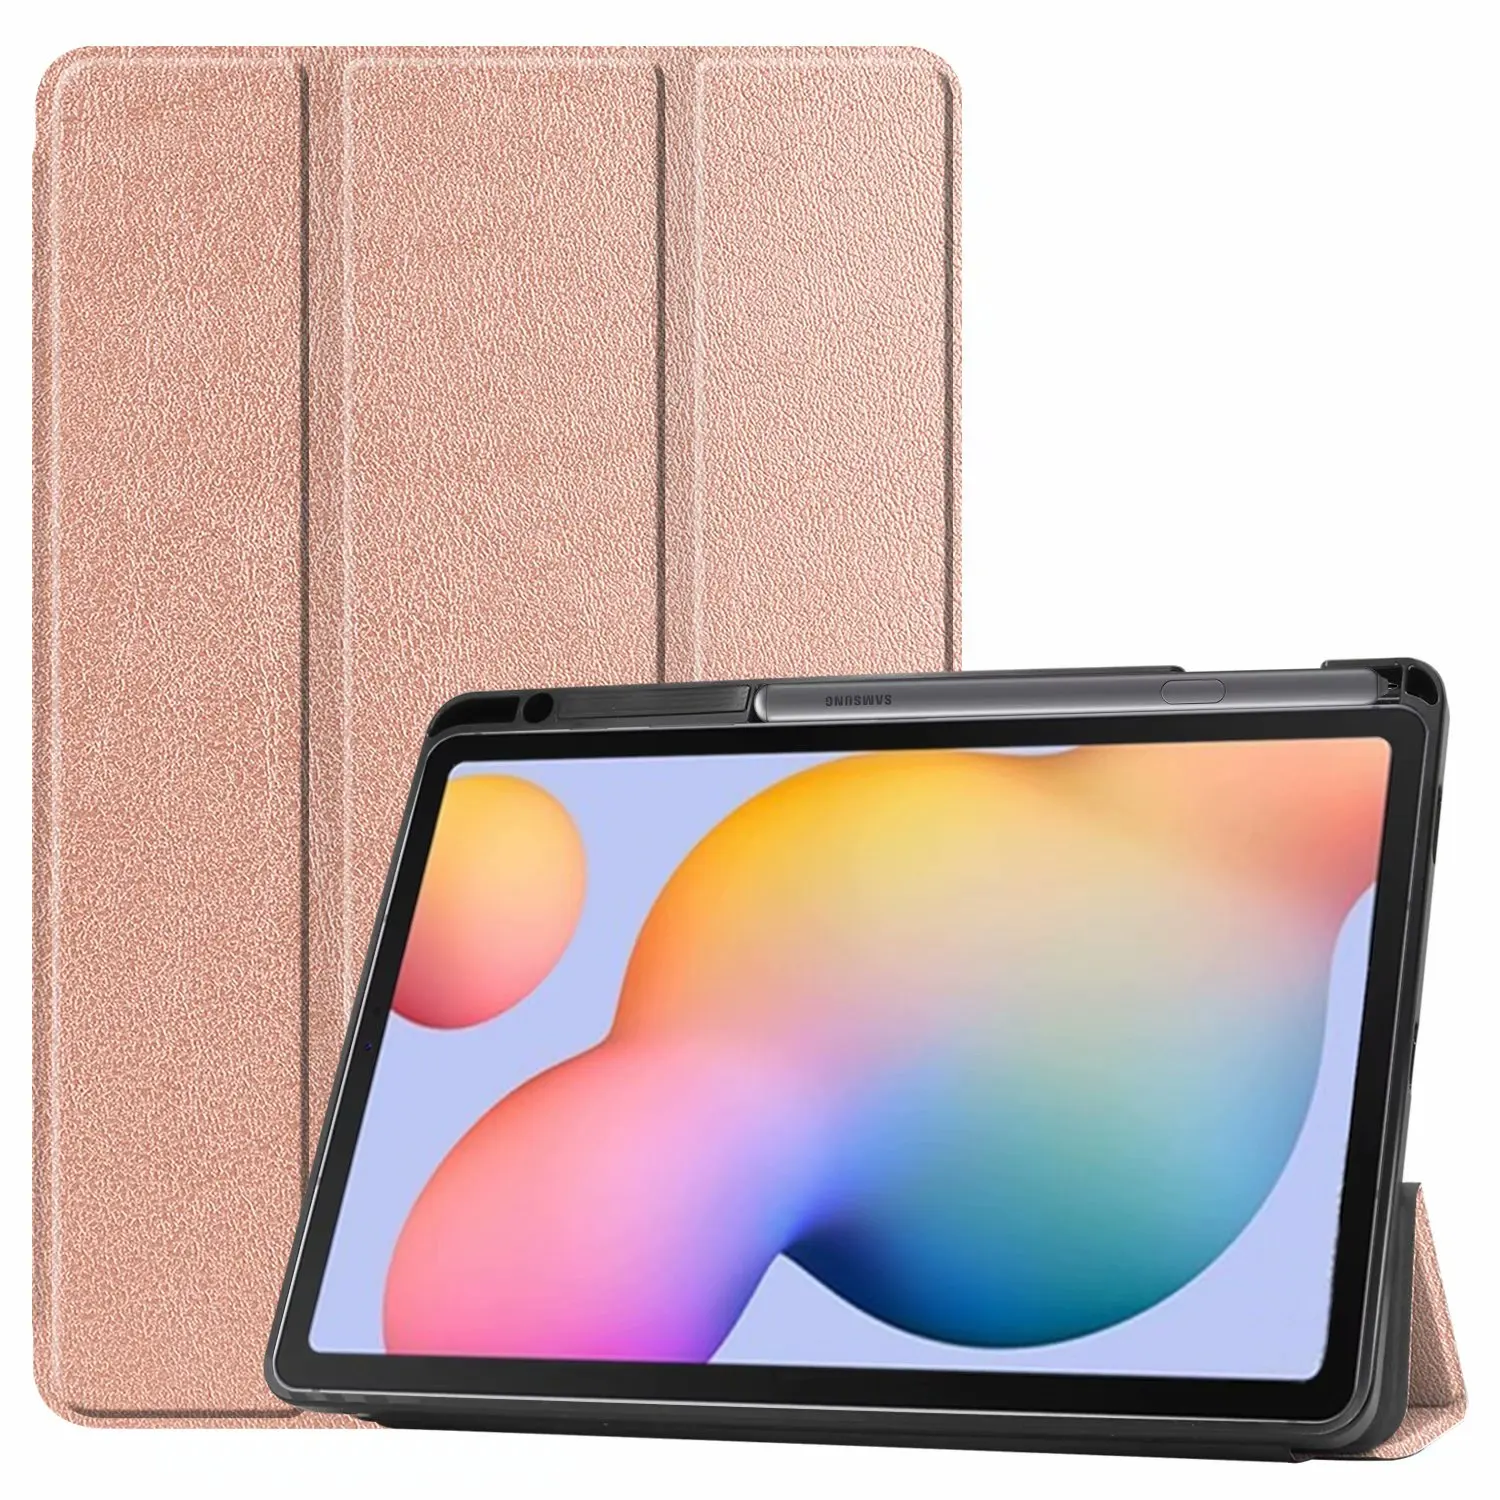 

Ultra Thin PU leather Stand Protective Tablet Flip Cover For Samsung Galaxy Tab S6 Lite 10.4"INCH SM P610 P615 Trifold case